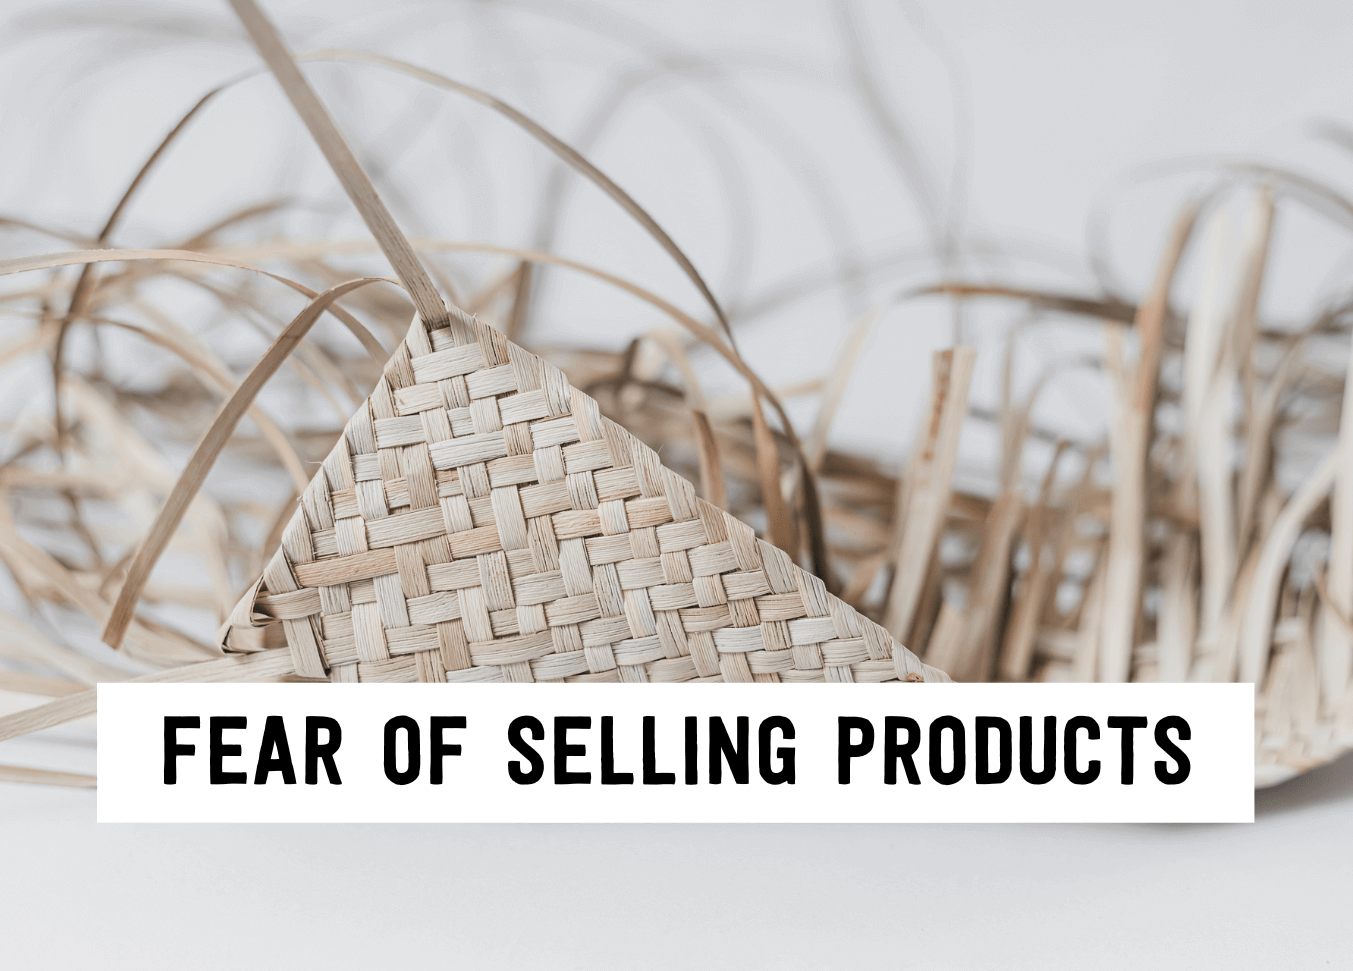 Fear of selling products | Tizzit.co - start and grow a successful handmade business